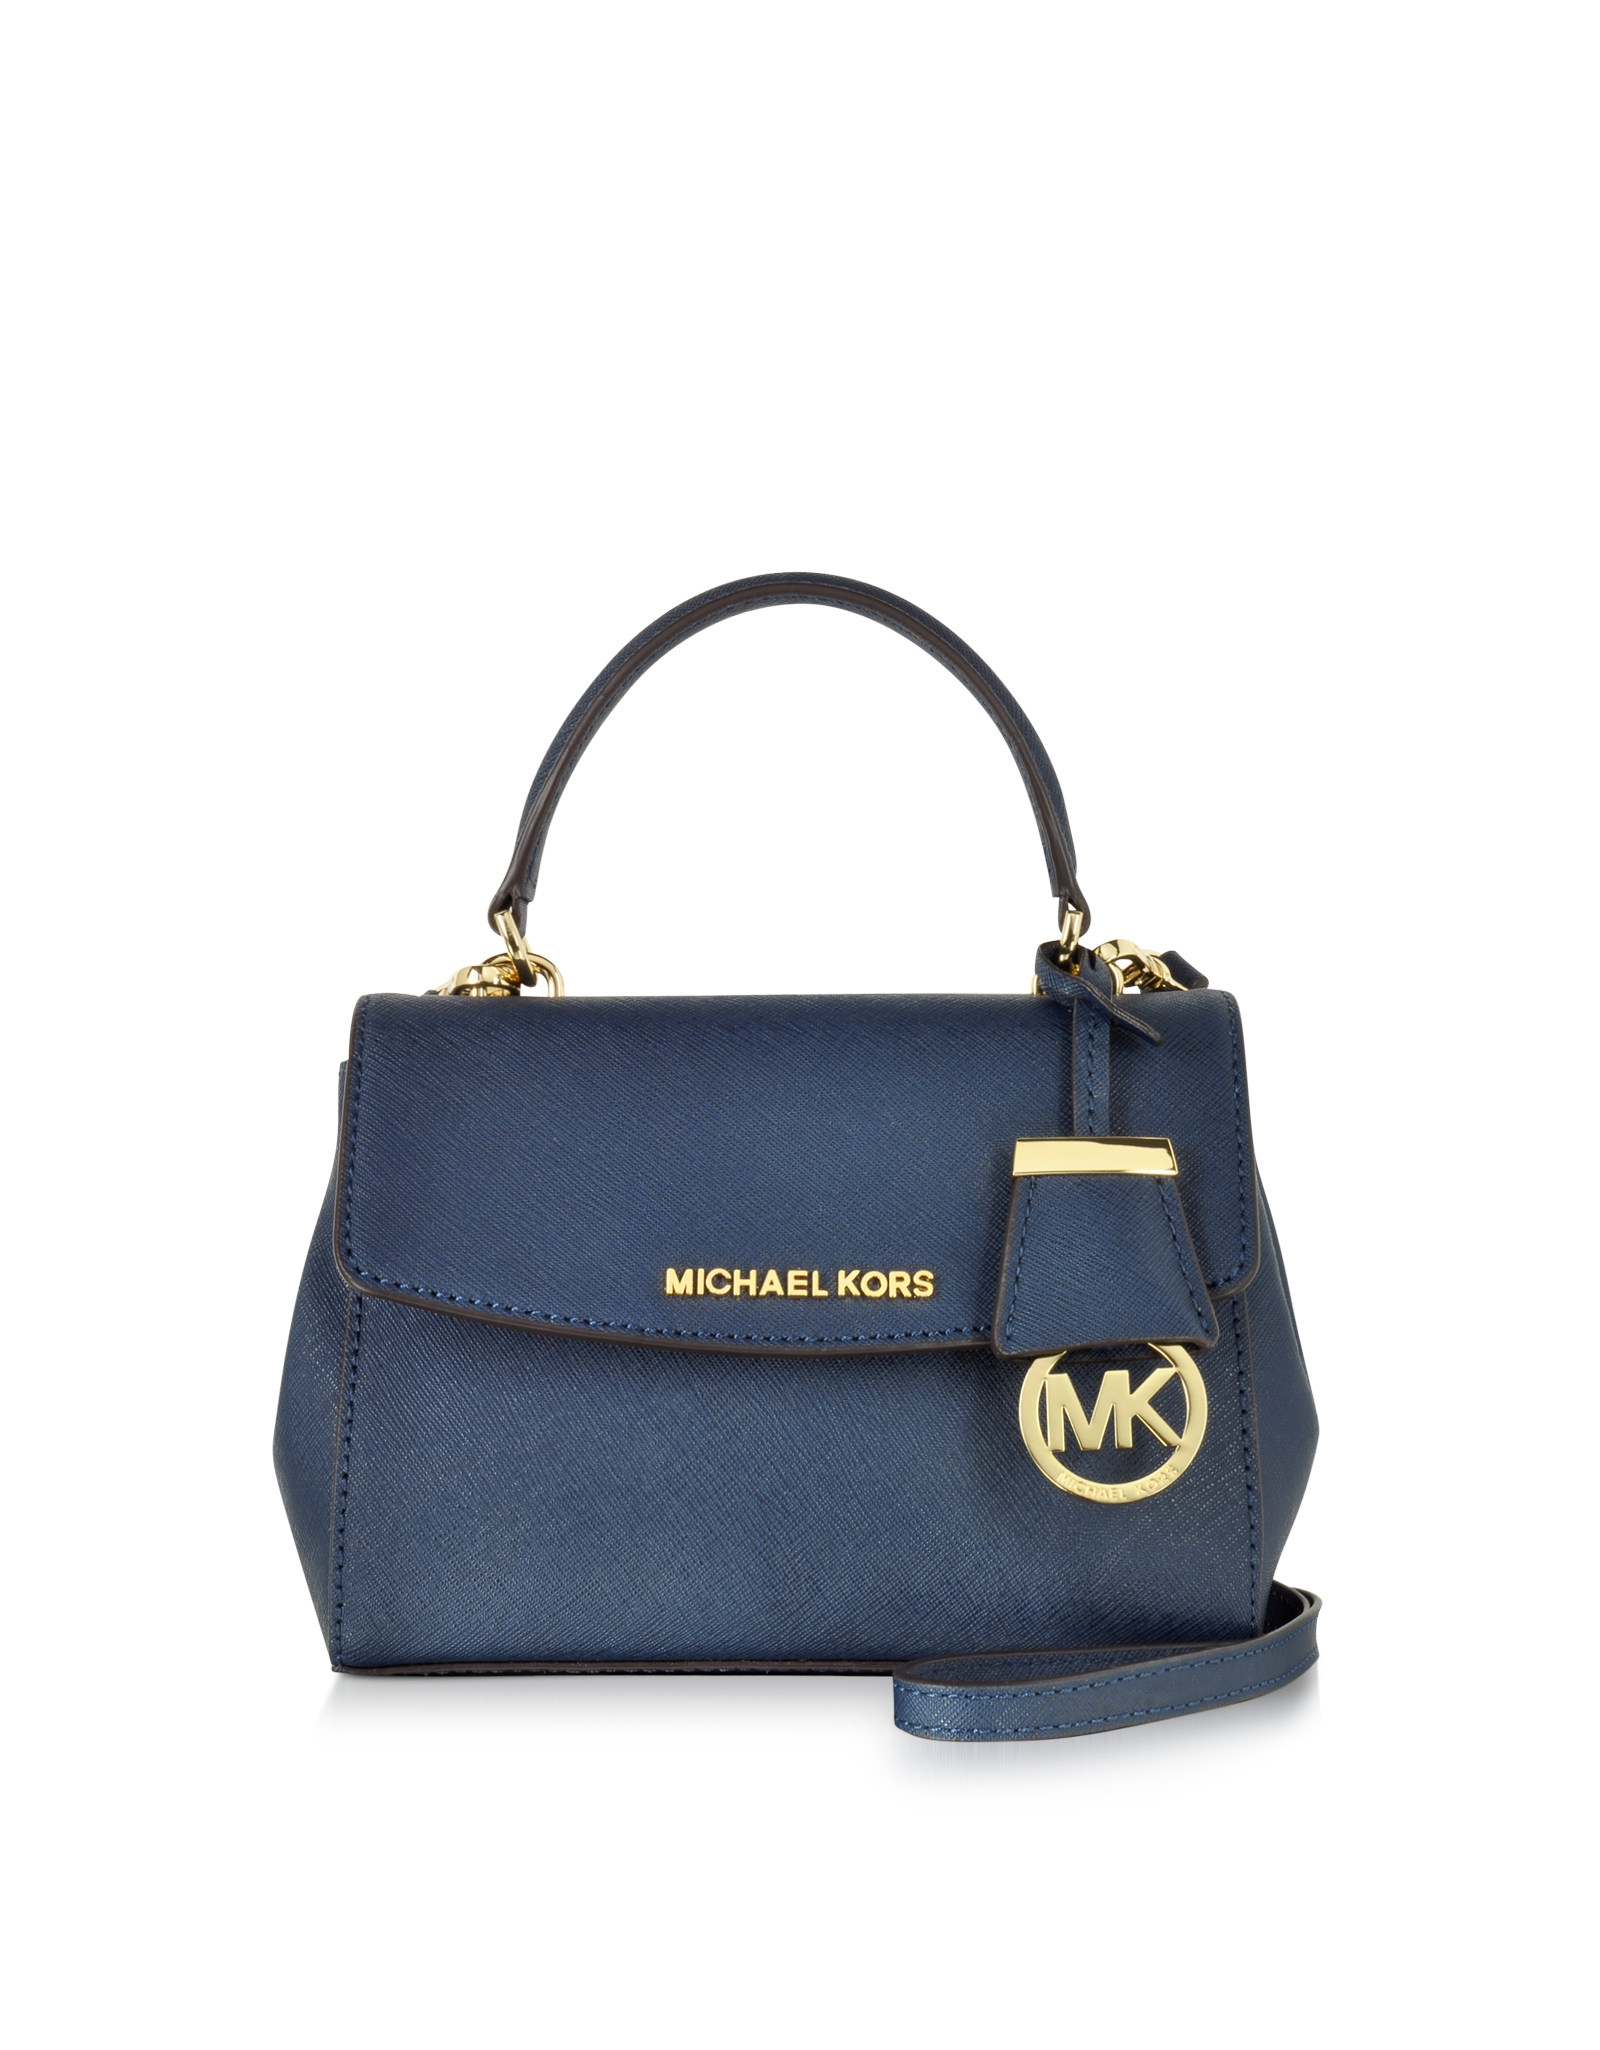 Michael Kors Ava Saffiano Leather Extra Small Crossbody Bag in Blue (Navy Blue) | Lyst